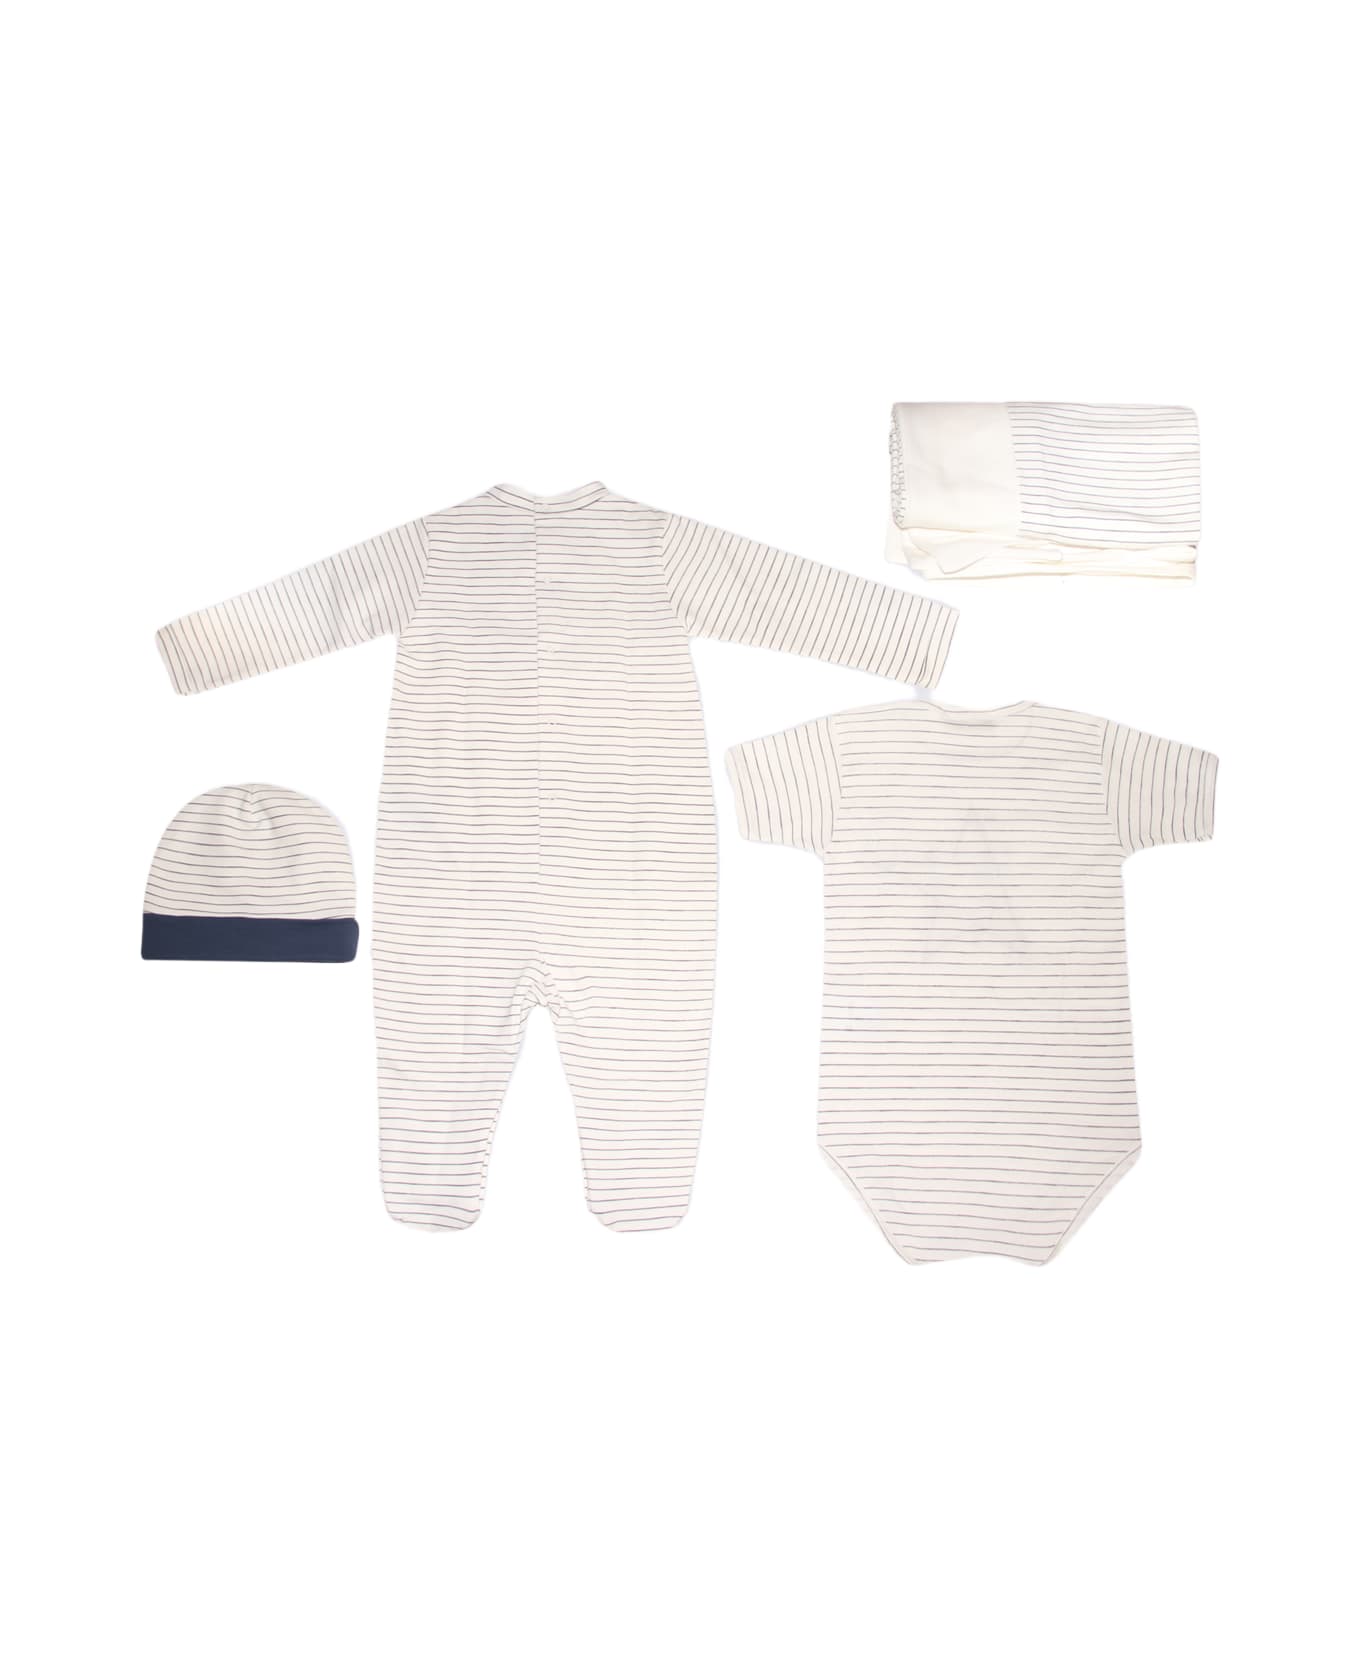 Golden Goose Blue And White Cotton 4 Pieces Nursery Set アクセサリー＆ギフト